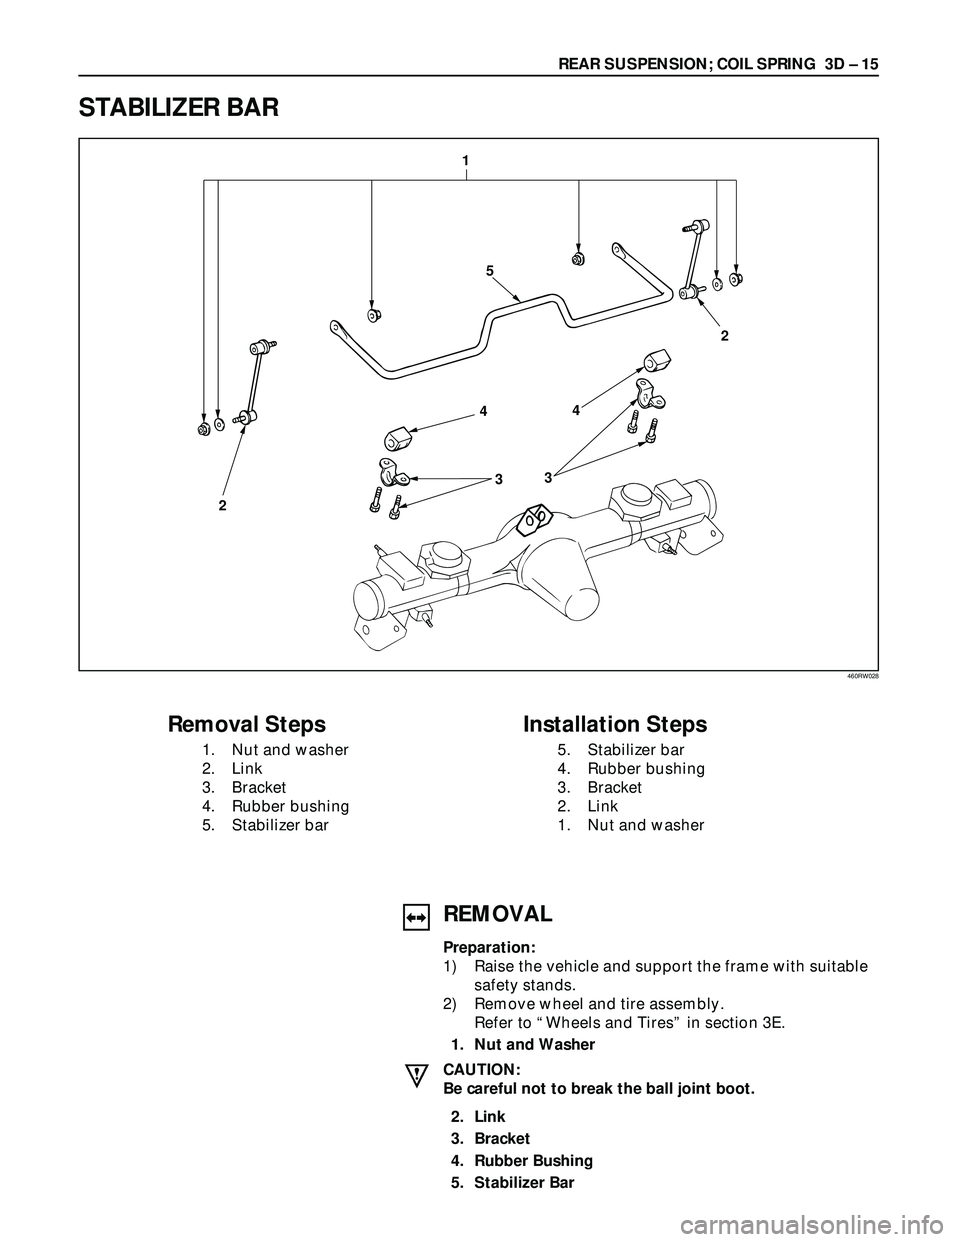 ISUZU TROOPER 1998  Service Owners Manual REAR SUSPENSION; COIL SPRING  3D – 15
STABILIZER BAR
1
5
2
44
33
2
Removal Steps
1. Nut and washer
2. Link
3. Bracket
4. Rubber bushing
5. Stabilizer bar
Installation Steps
5. Stabilizer bar
4. Rubb